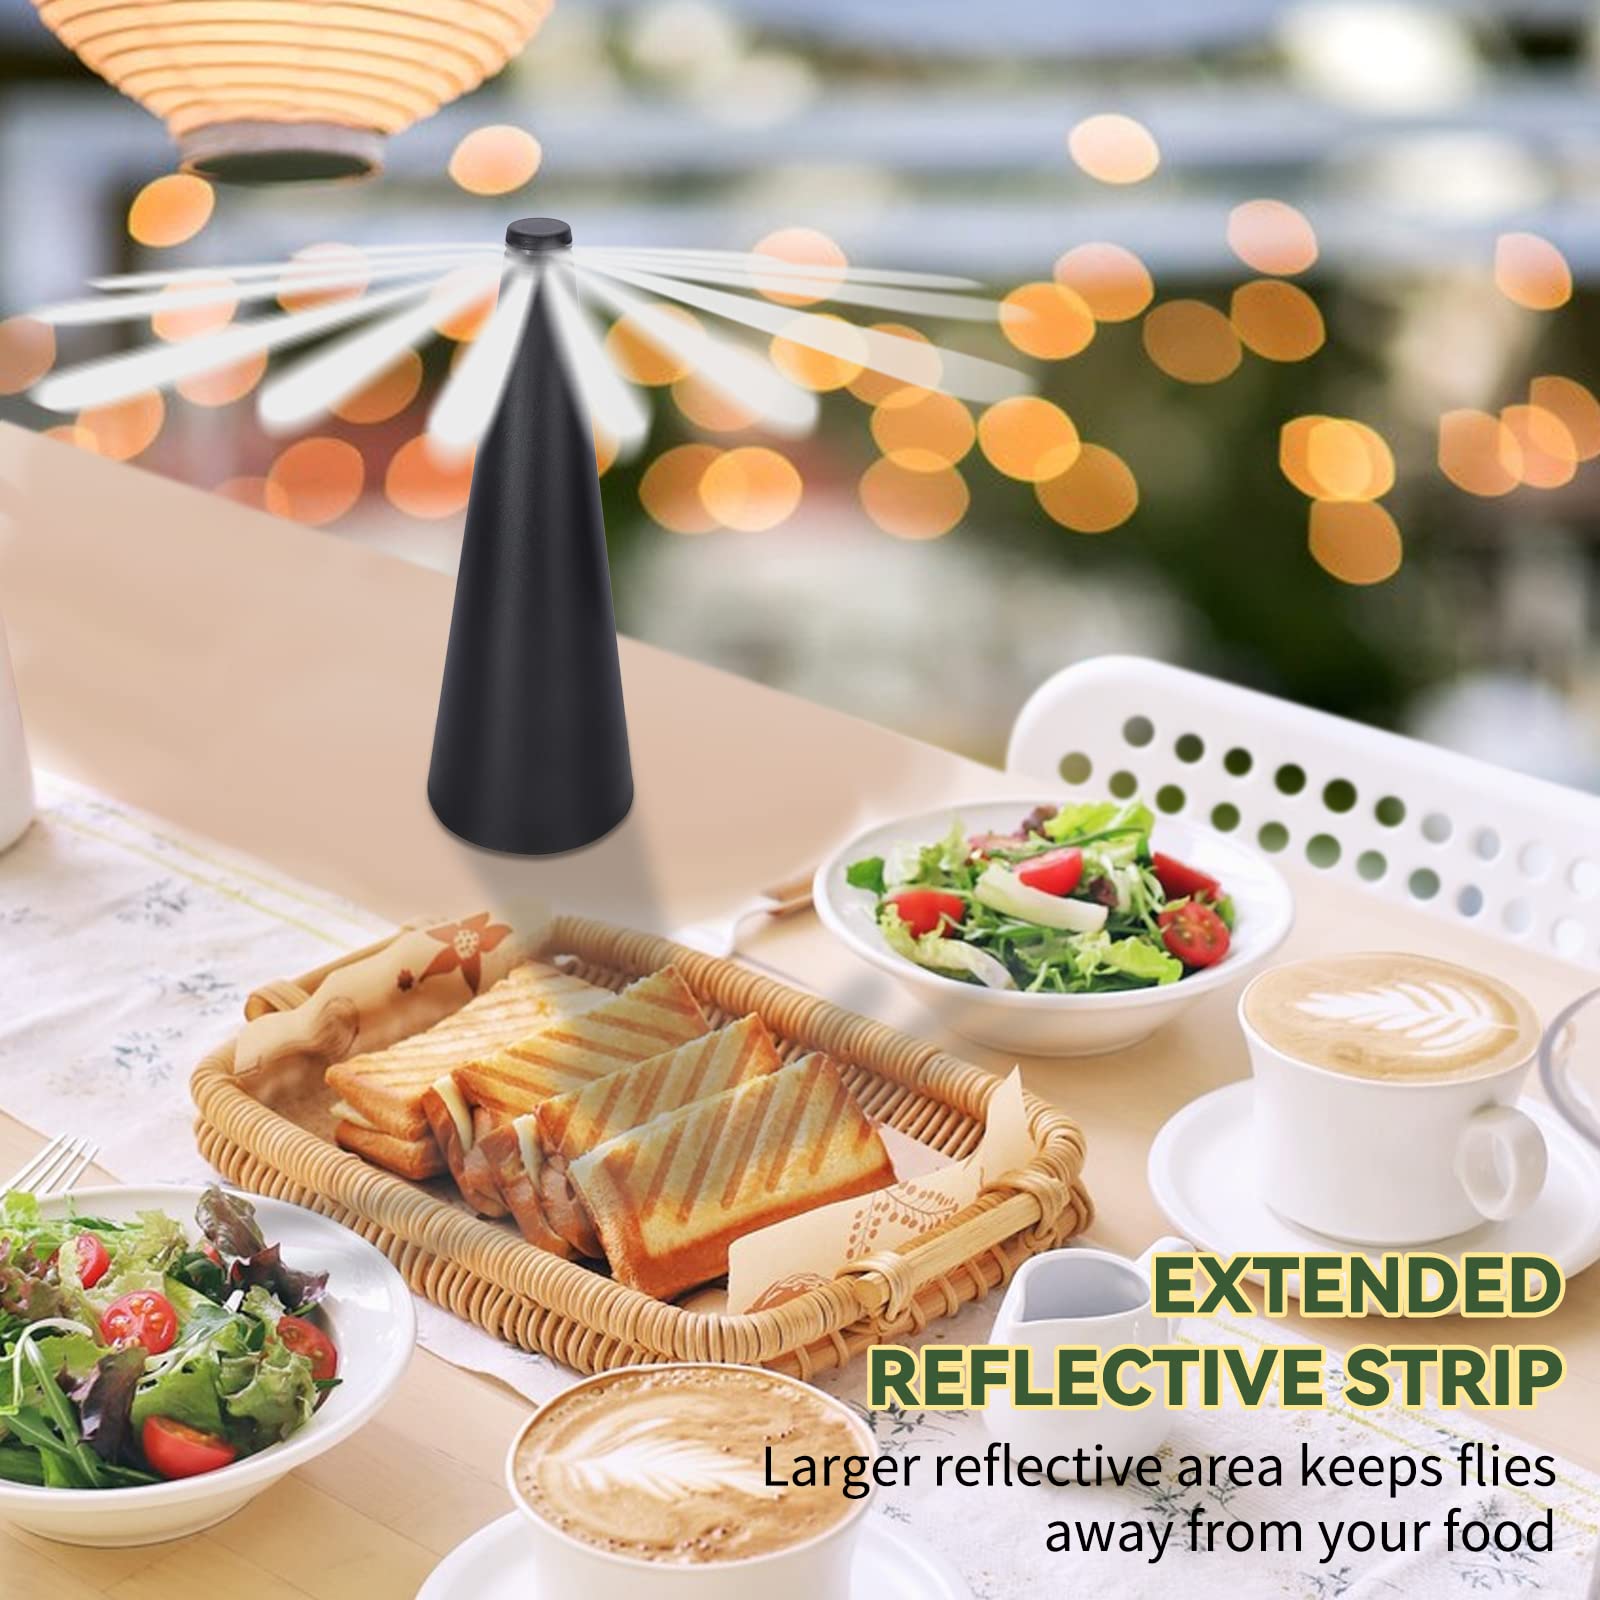 Fly Fans for Tables Fly Repellent for Outdoor Bug Fan Bugs Fly for Indoor Fly Insect Traps Fan Keep Flies and Bugs Zapper Table Patio Fly Fans Deterrent 3Pcs